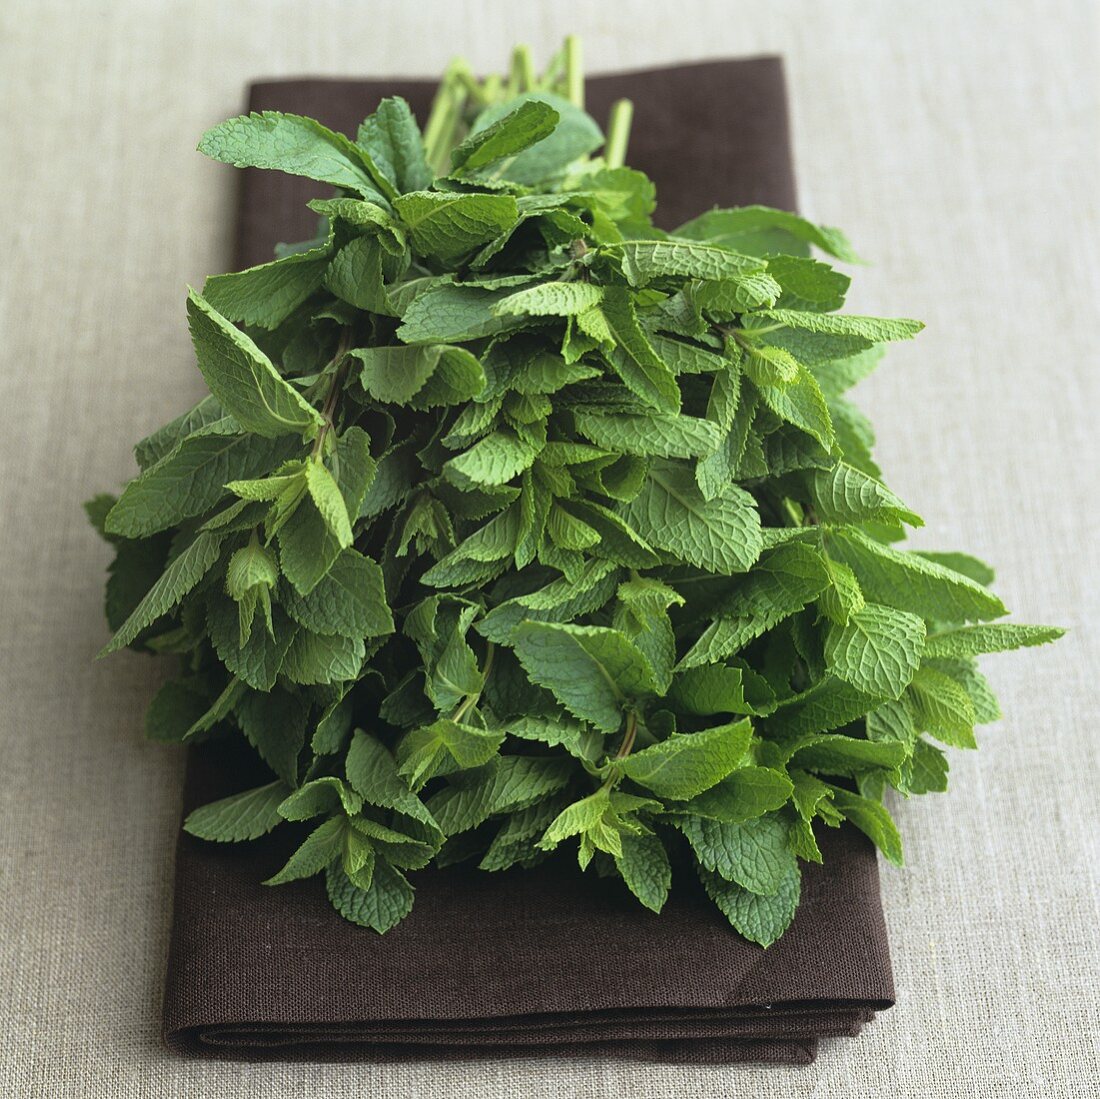 A bunch of fresh mint on a brown cloth